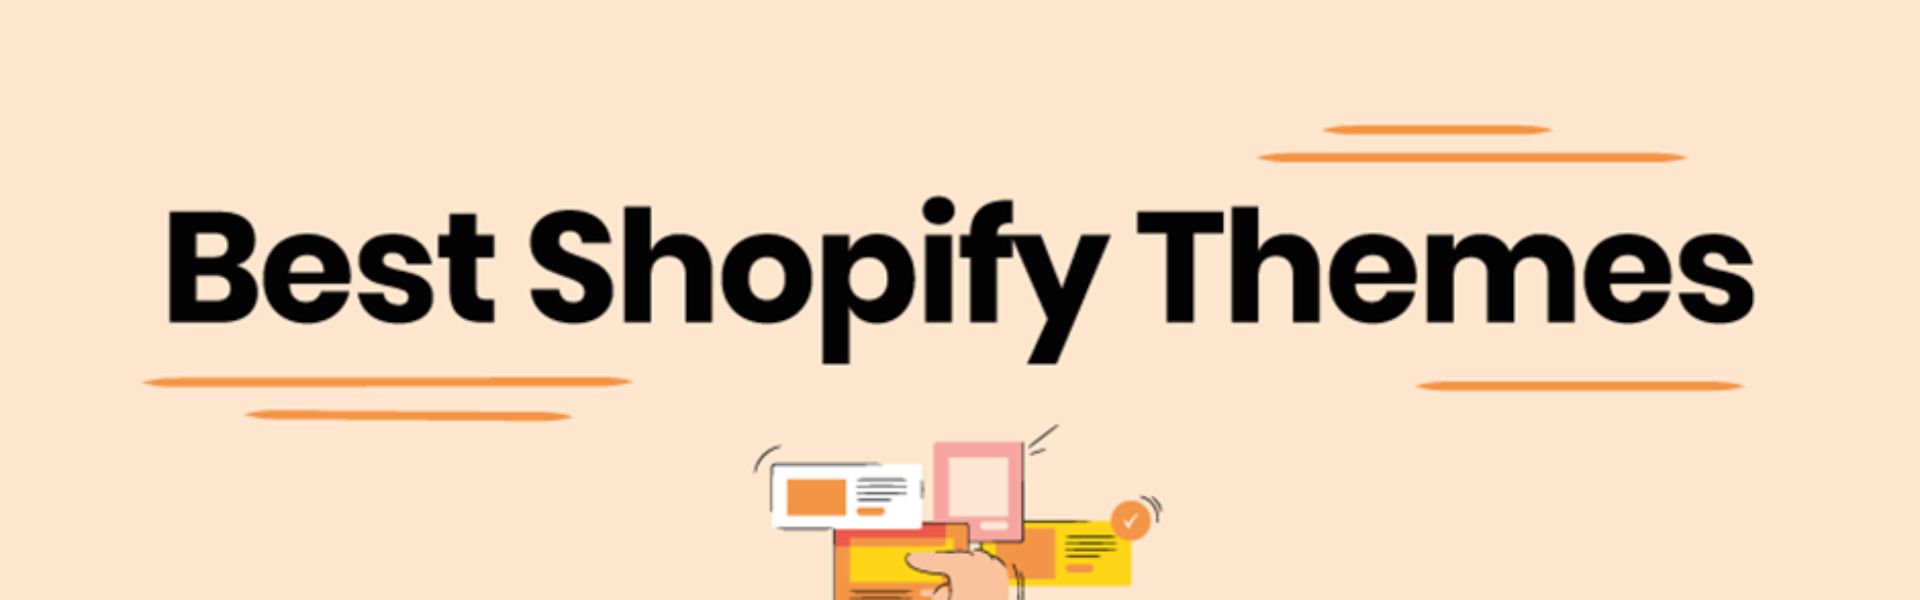 10 Best Shopify Themes to Convert Visitors into Buyers